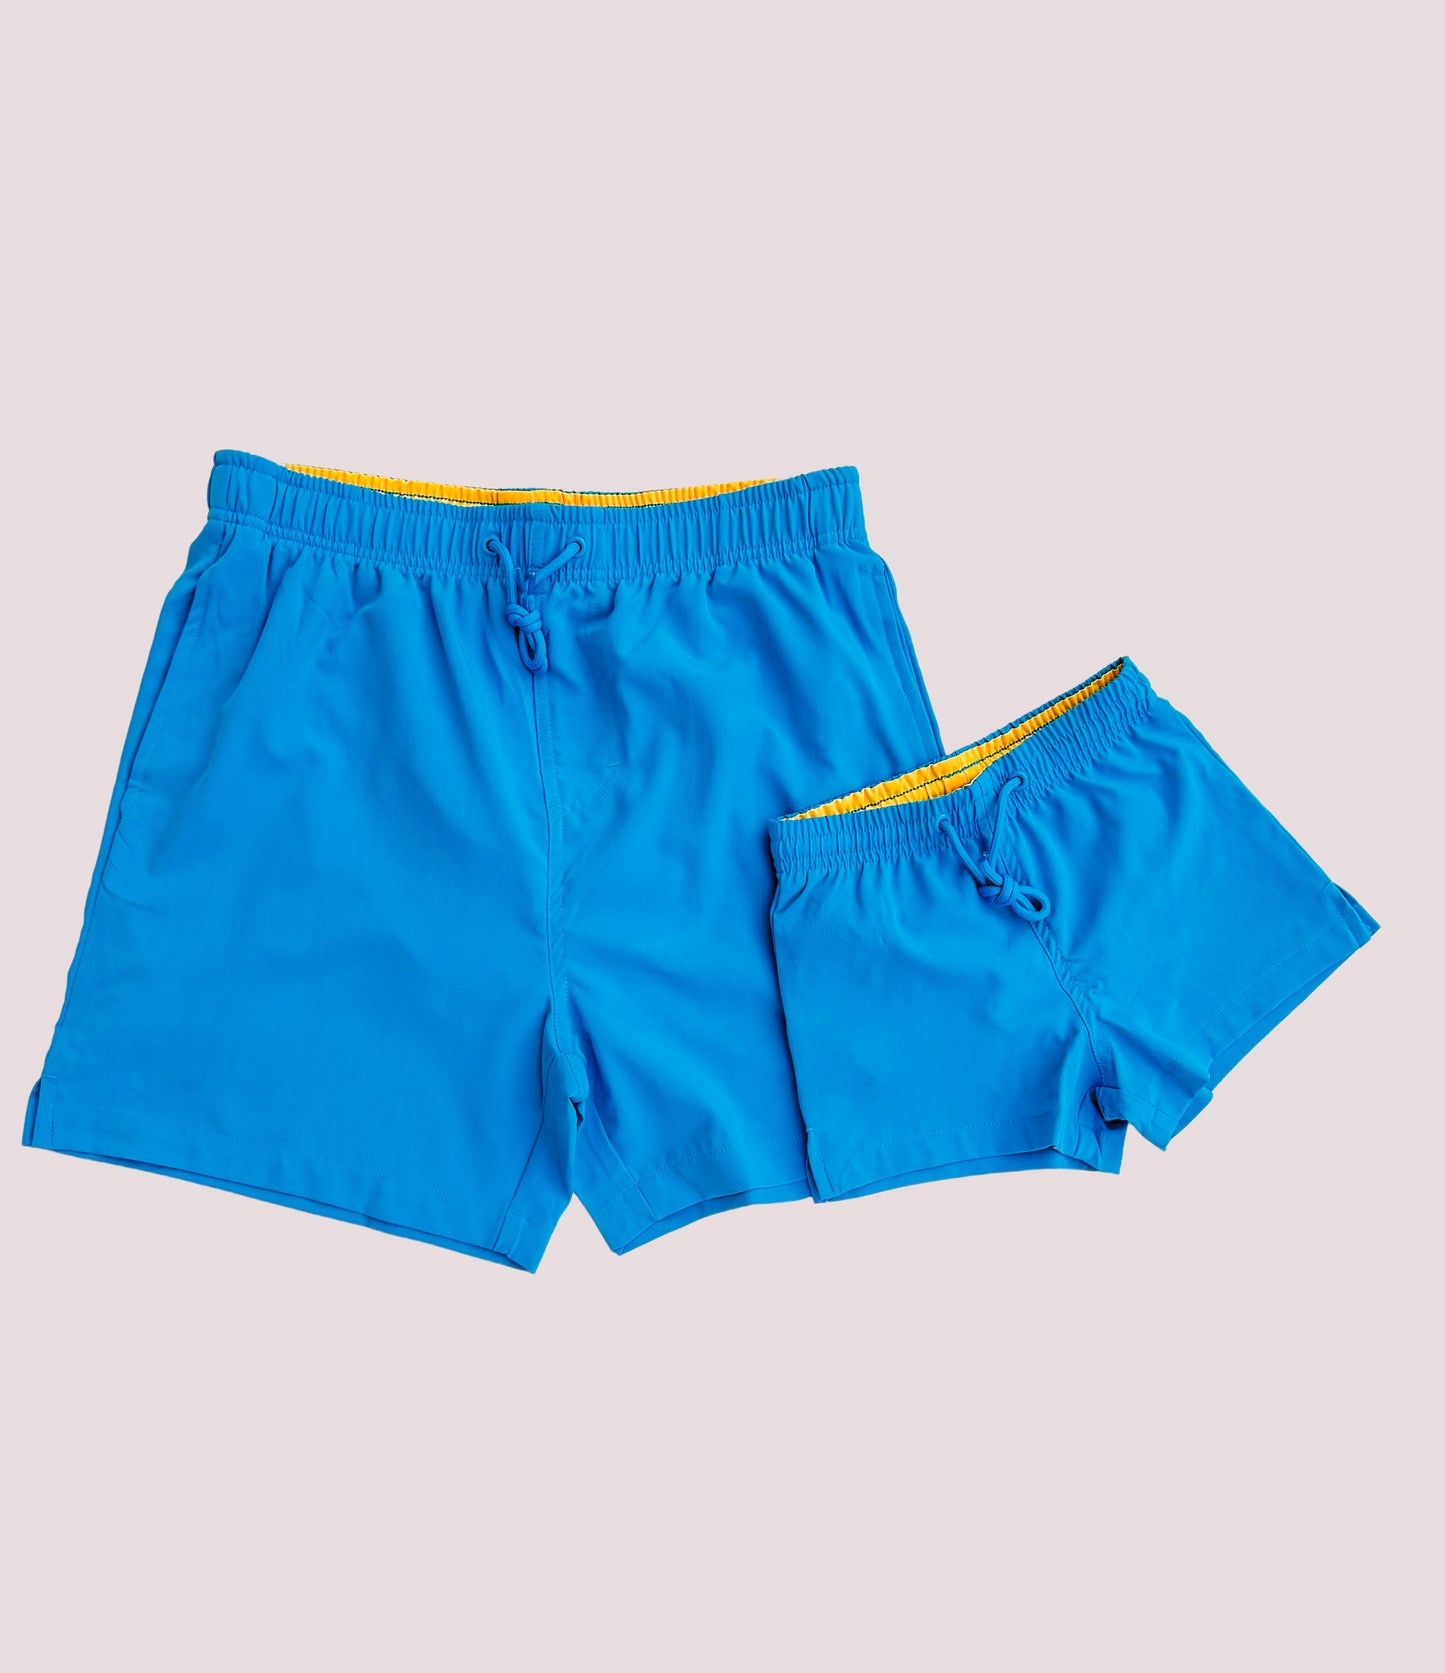 Turquoise Daddy and Son Matching Swim Trunks